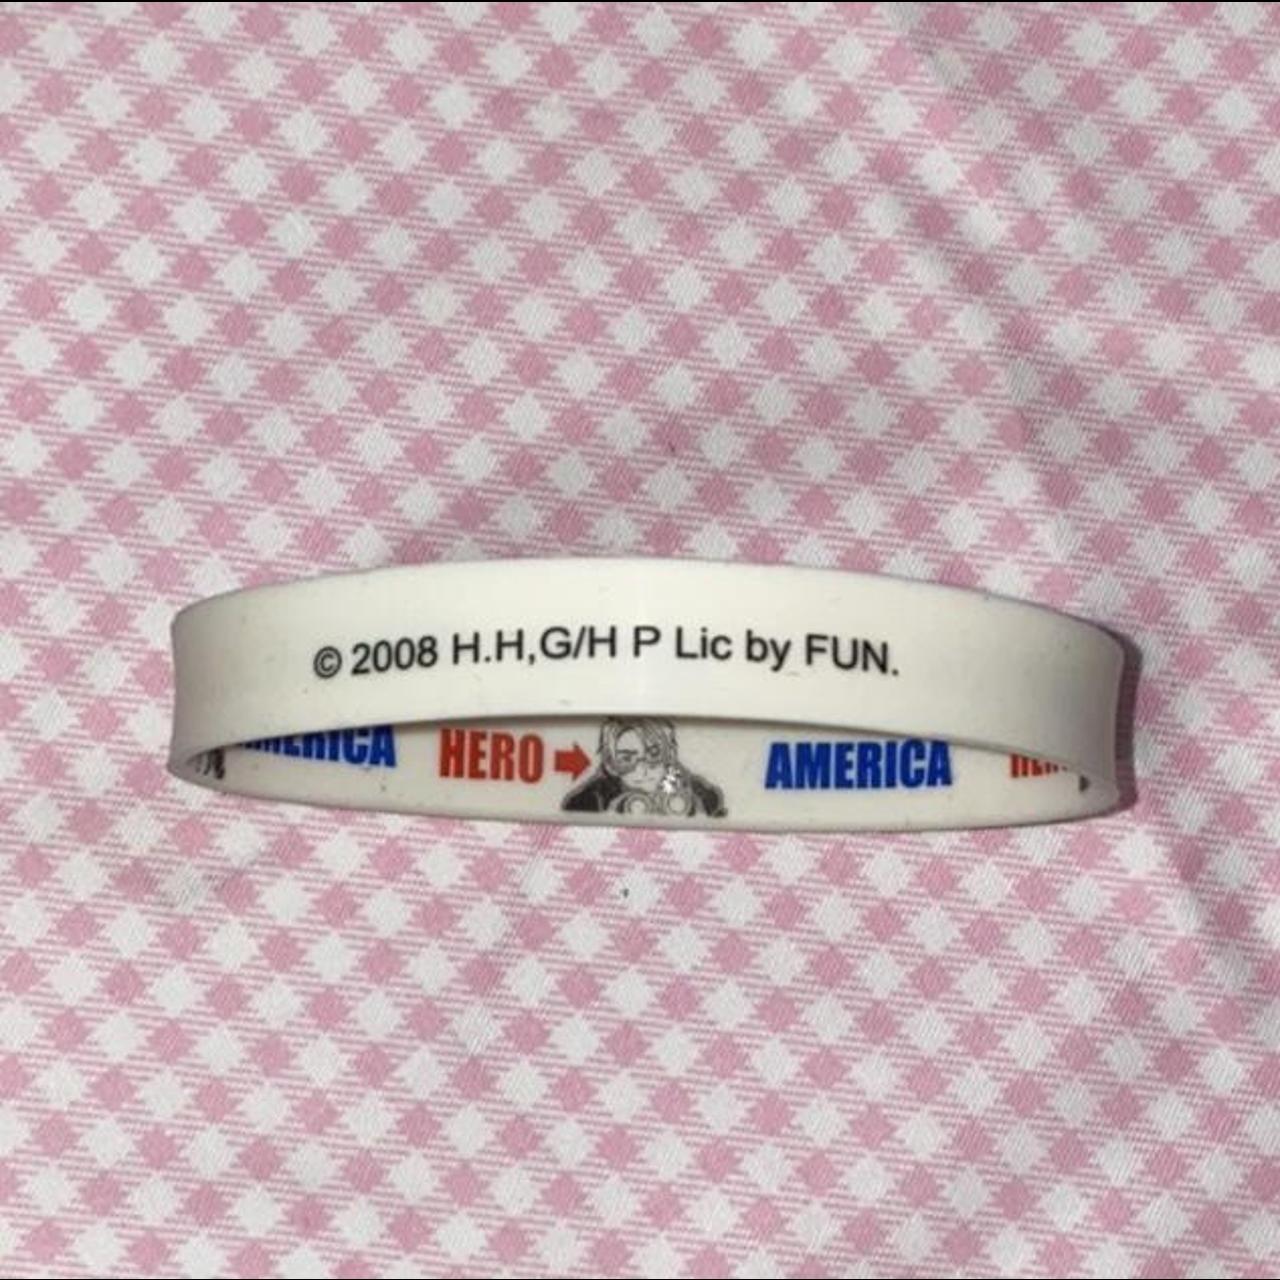 Product Image 2 - Hetalia Rubber Wristbands

Comes with pack